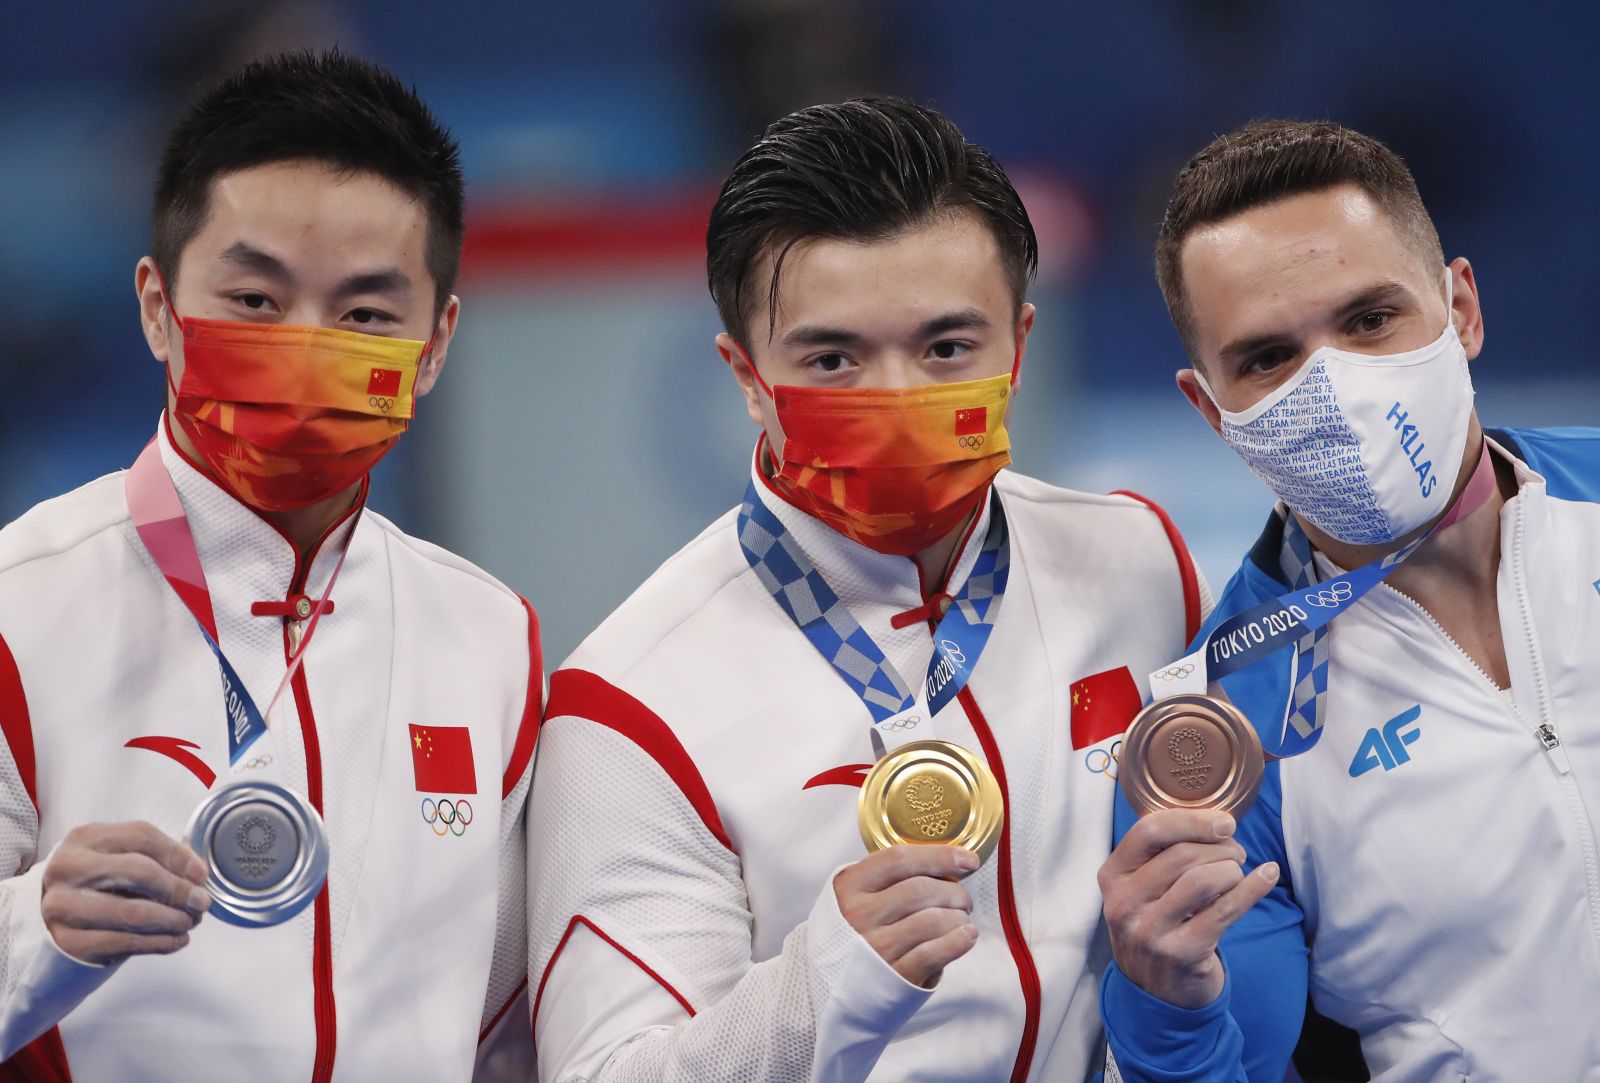 epa09387487 L-R: Silver medal winner Hao You of China, gold medal winner Yang Liu of China and bronze medal winner Eleftherios Petrounias of Greece pose on the podium during the medal ceremony for the Men's Ring Final during the Artistic Gymnastics events of the Tokyo 2020 Olympic Games at the Ariake Gymnastics Centre in Tokyo, Japan, 02 August 2021.  EPA/TATYANA ZENKOVICH